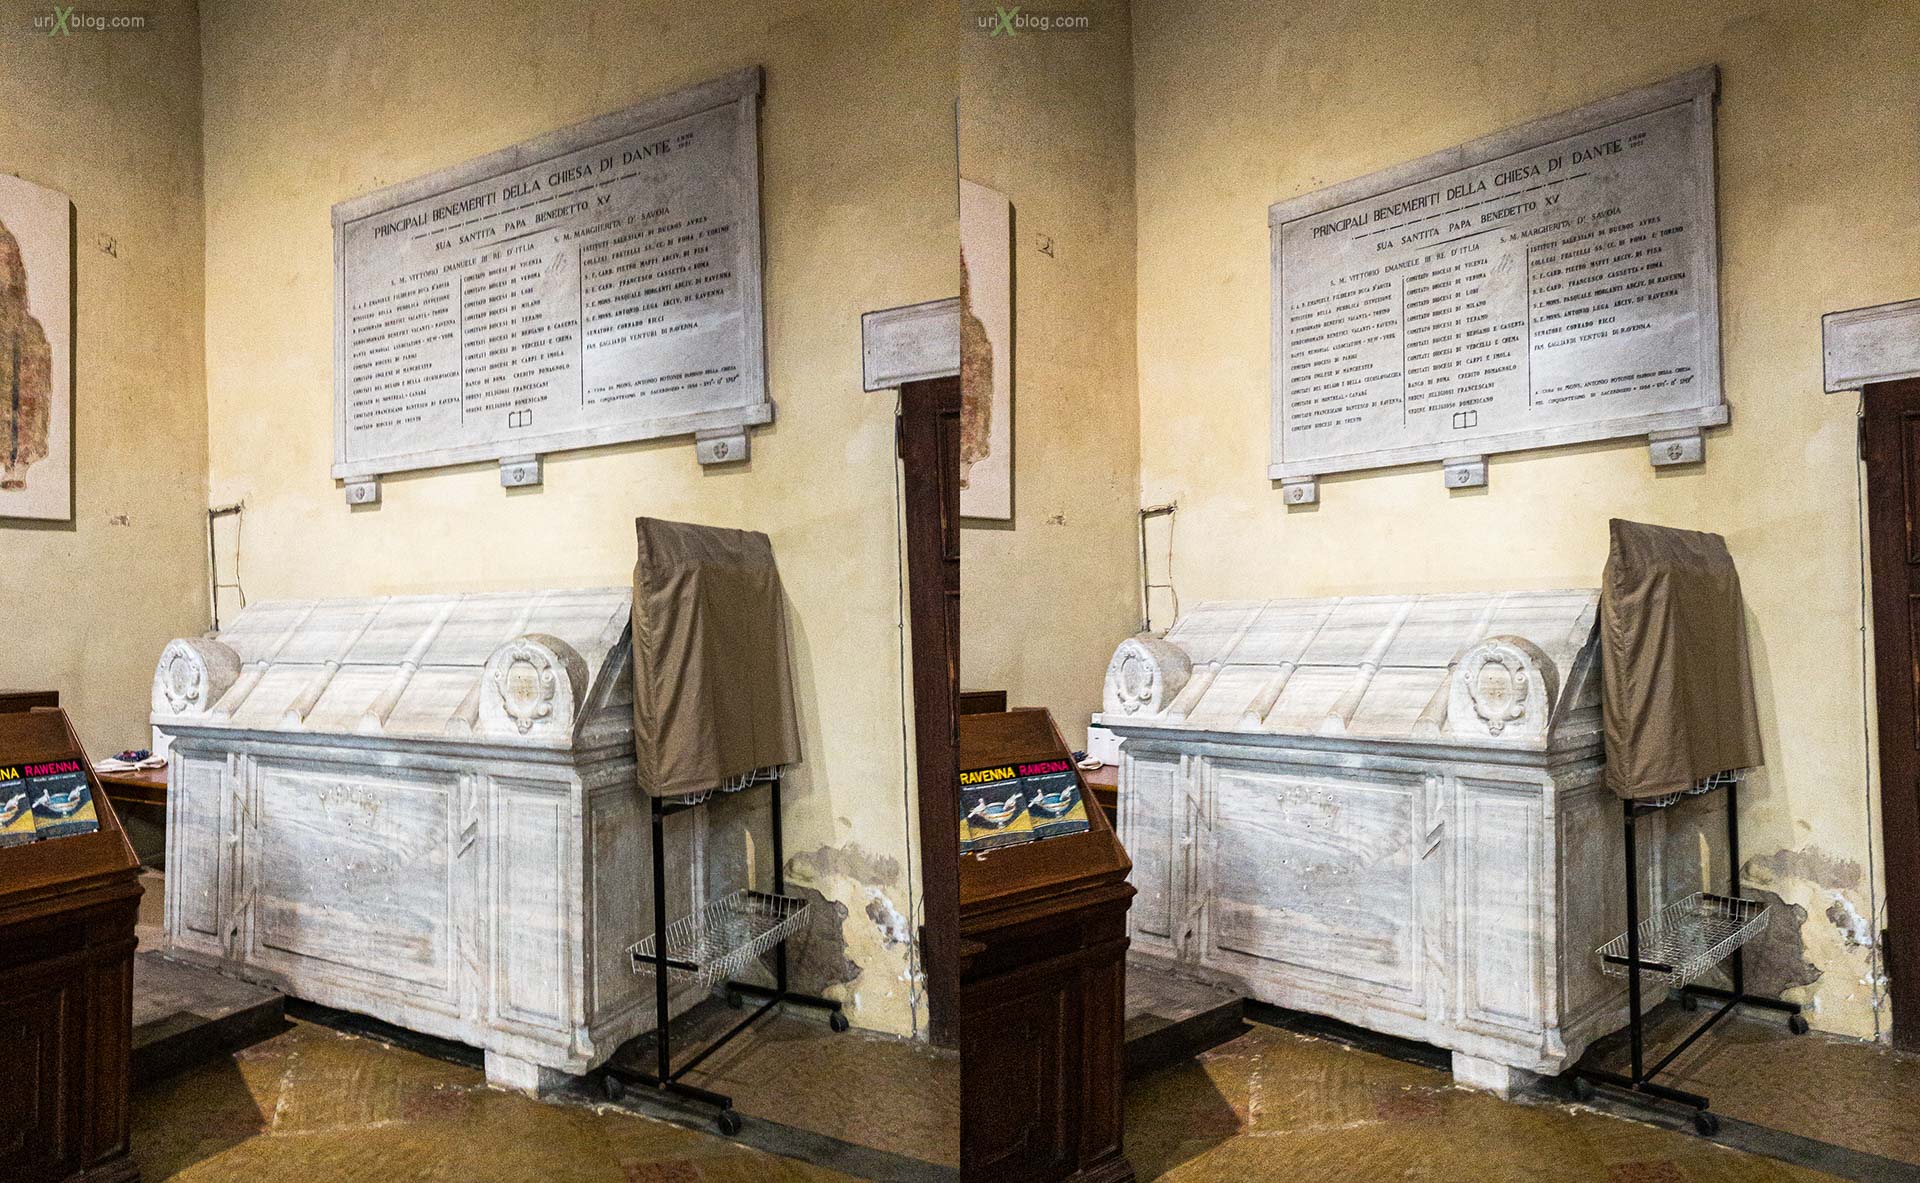 Basilica of Saint Francis, Ravenna, Italy, 3D, stereo pair, cross-eyed, crossview, cross view stereo pair, stereoscopic